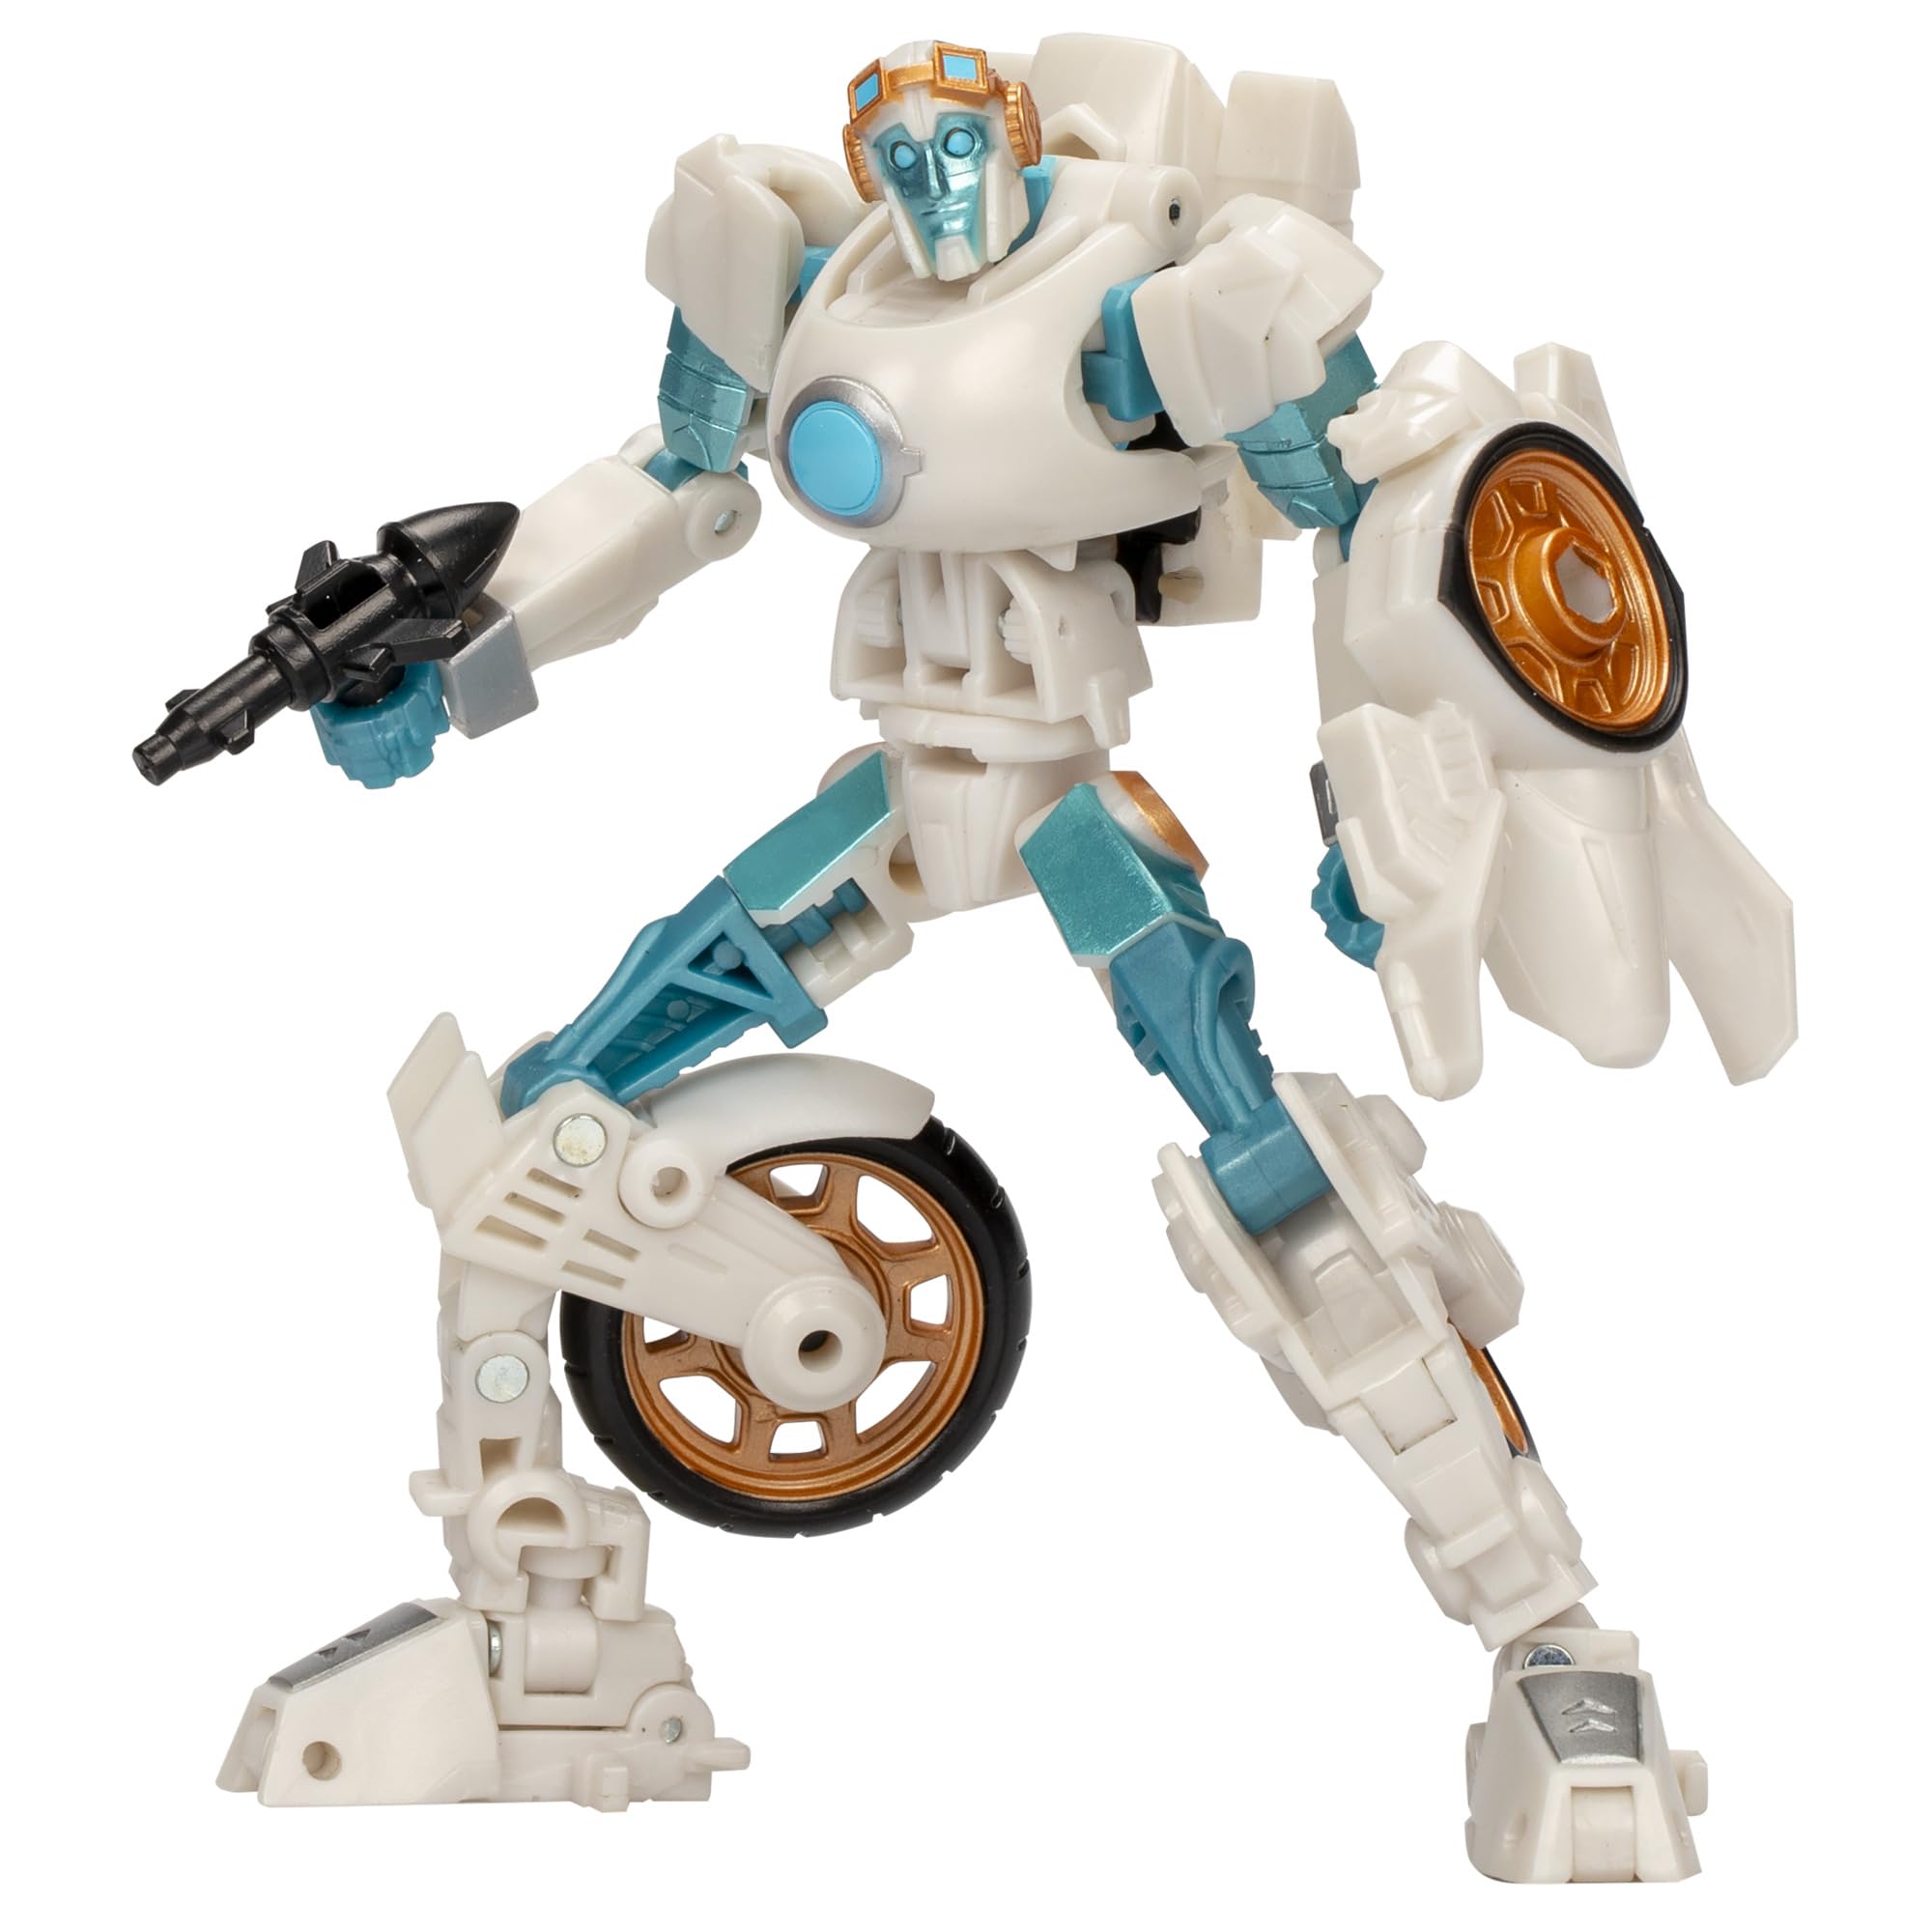 Transformers EarthSpark Deluxe Class Terran Thrash 5-Inch Robot Action Figure, Converts in 22 Steps, Interactive Toys for Boys for Girls Age 6 and Up